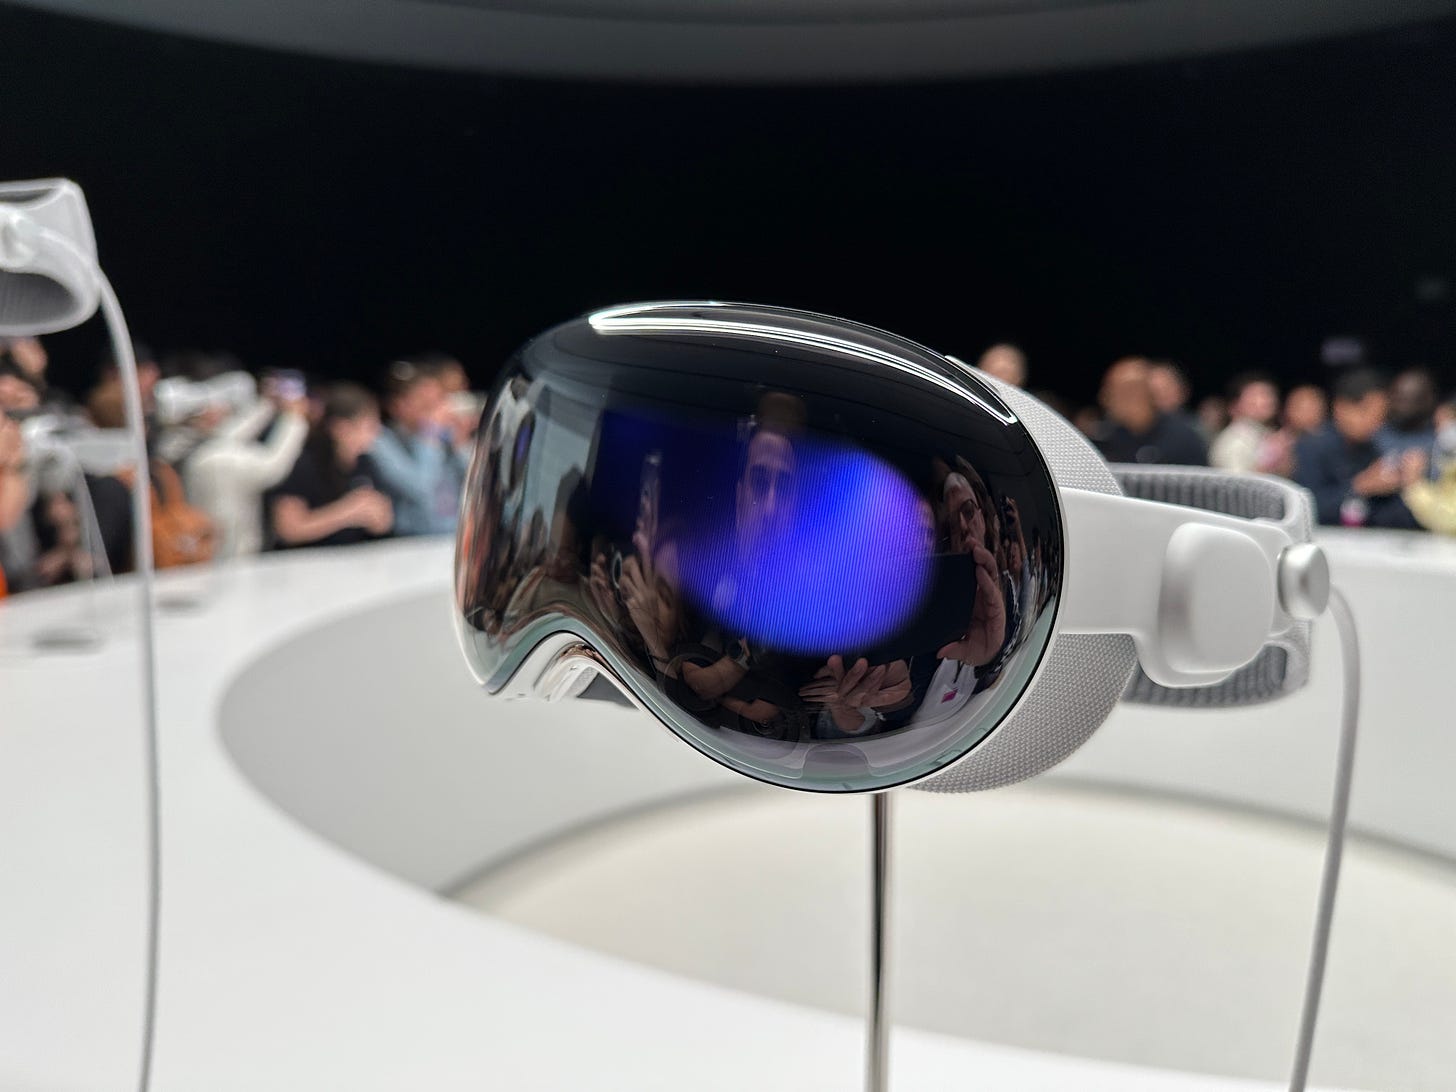 The Apple Vision Pro shown on display in the Steve Jobs Theater on Monday in Cupertino. (Christoph Dernbach / Getty Images)